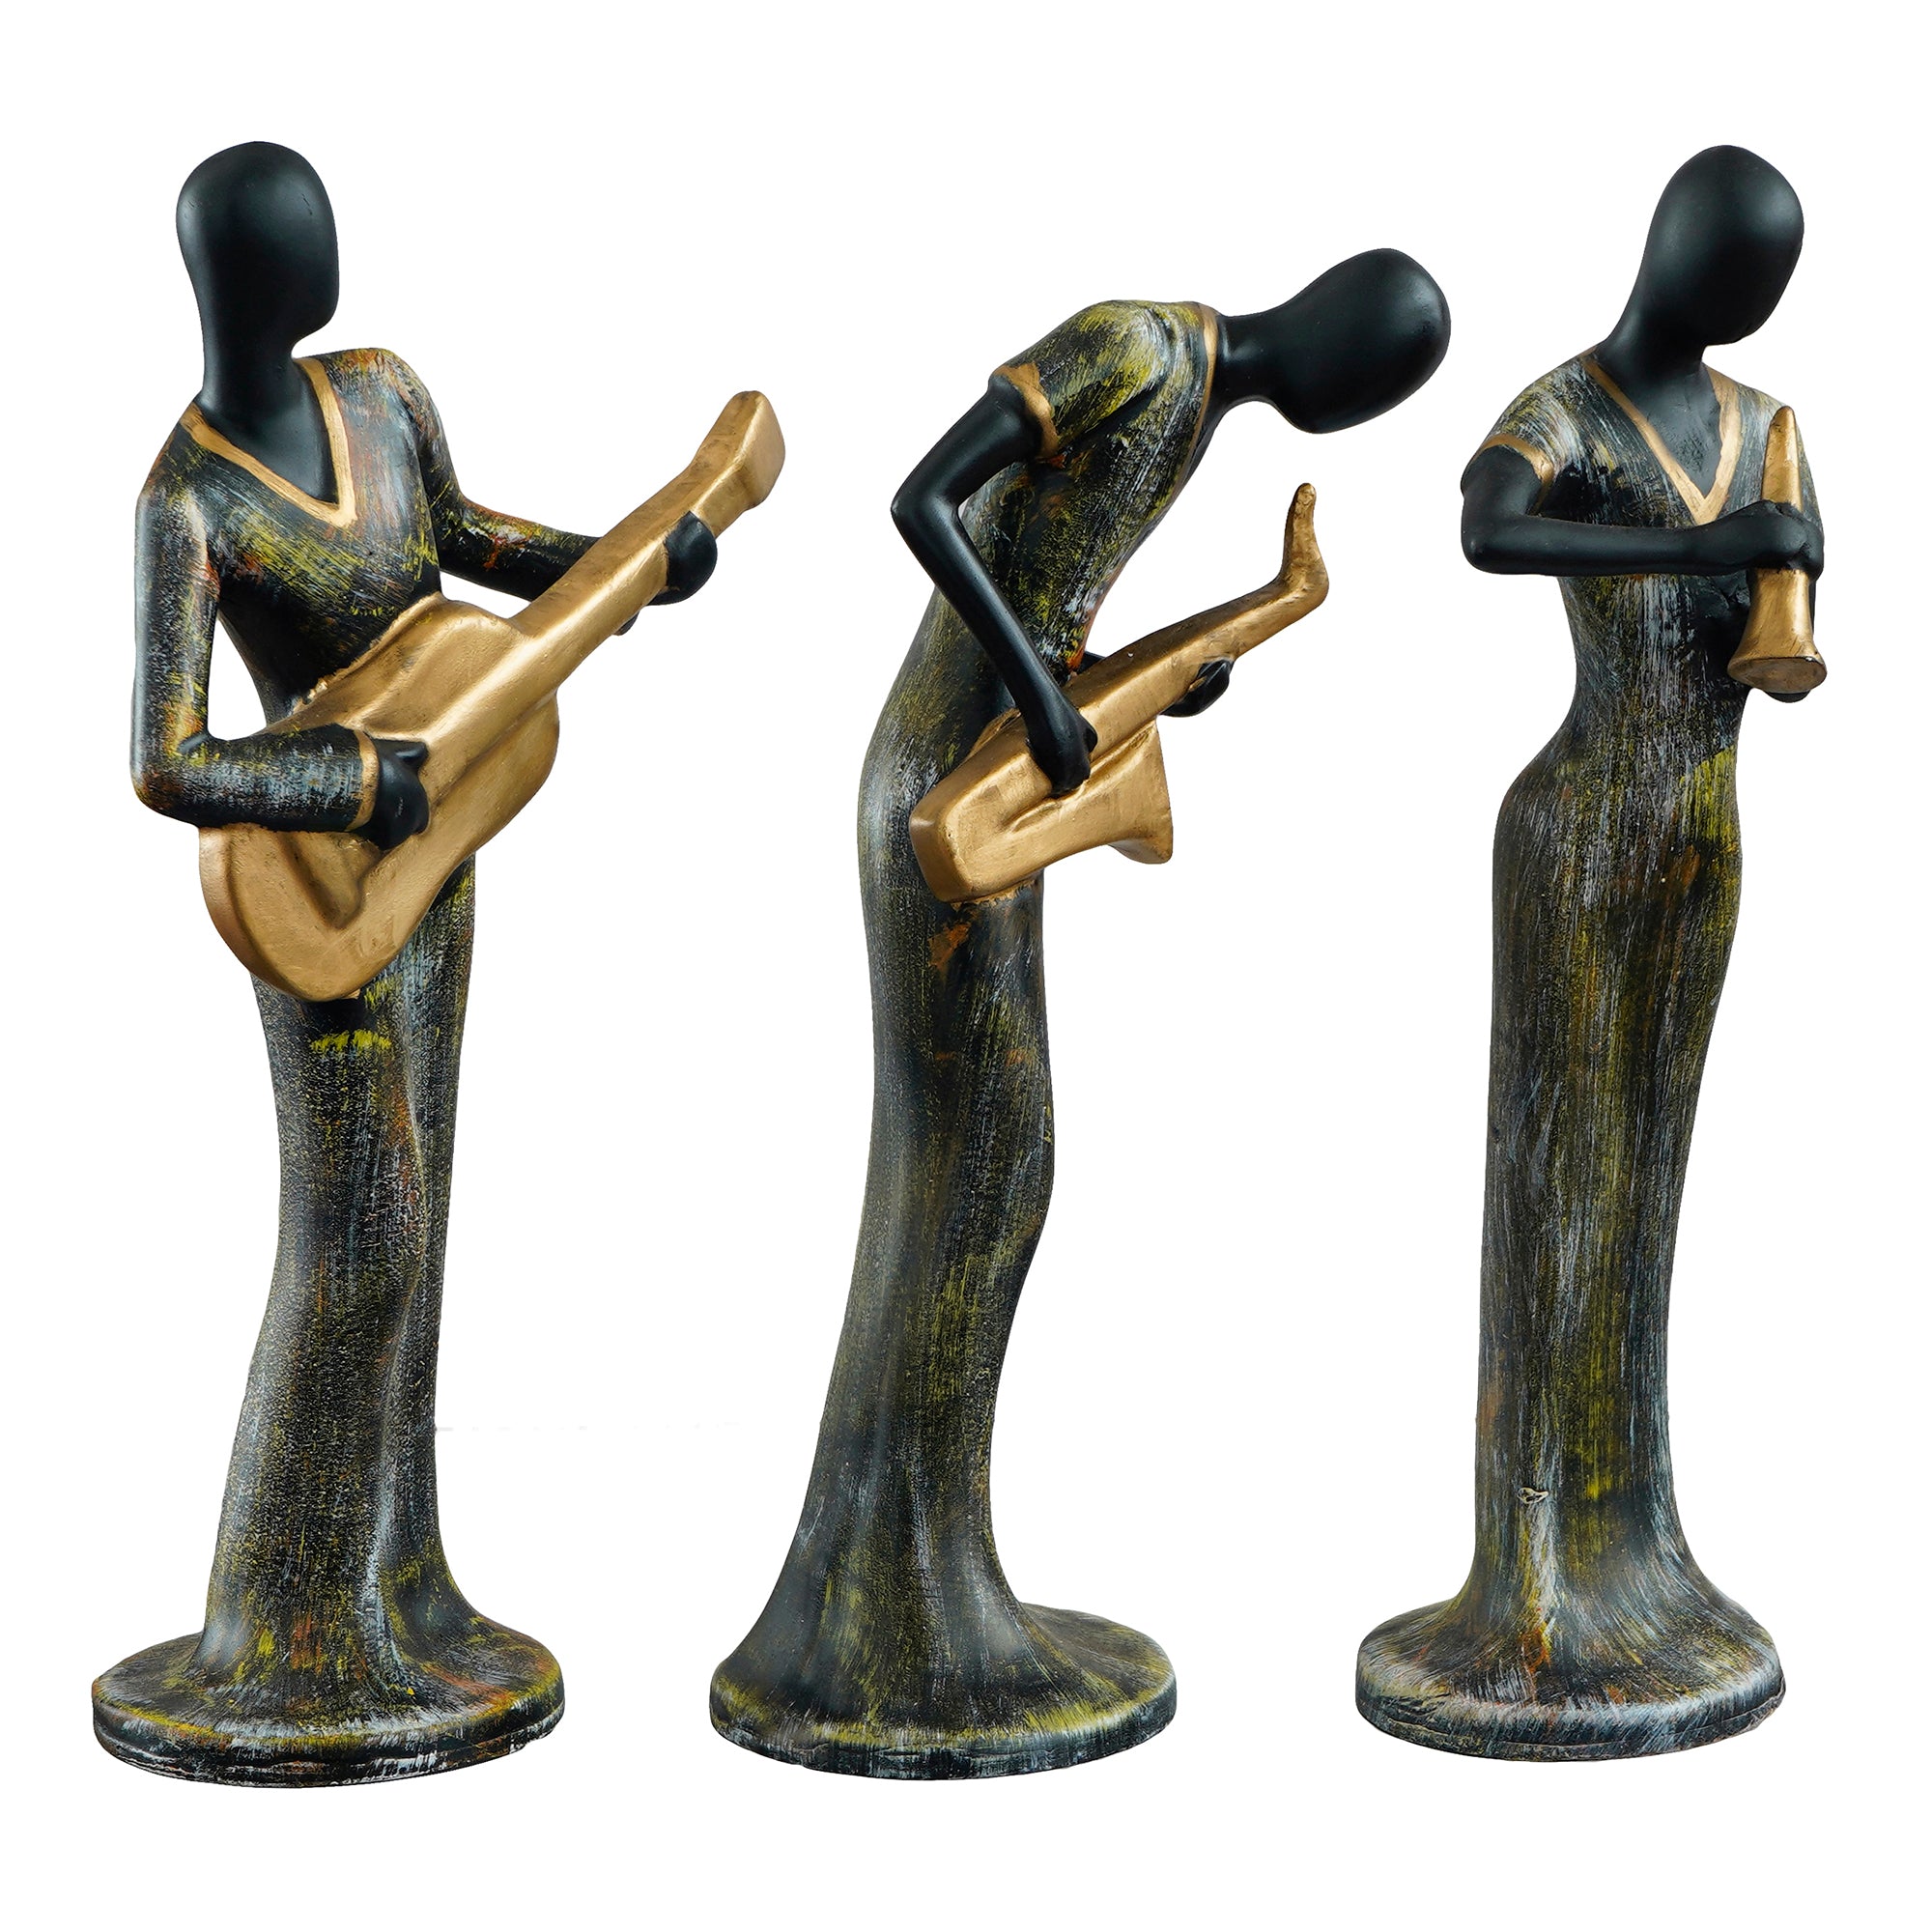 Grey and Black Polyresin Set of 3 Ladies figurines Playing Guitar, Clarinet, Saxophone Musical Instrument Handcrafted Decorative Showpiece 4